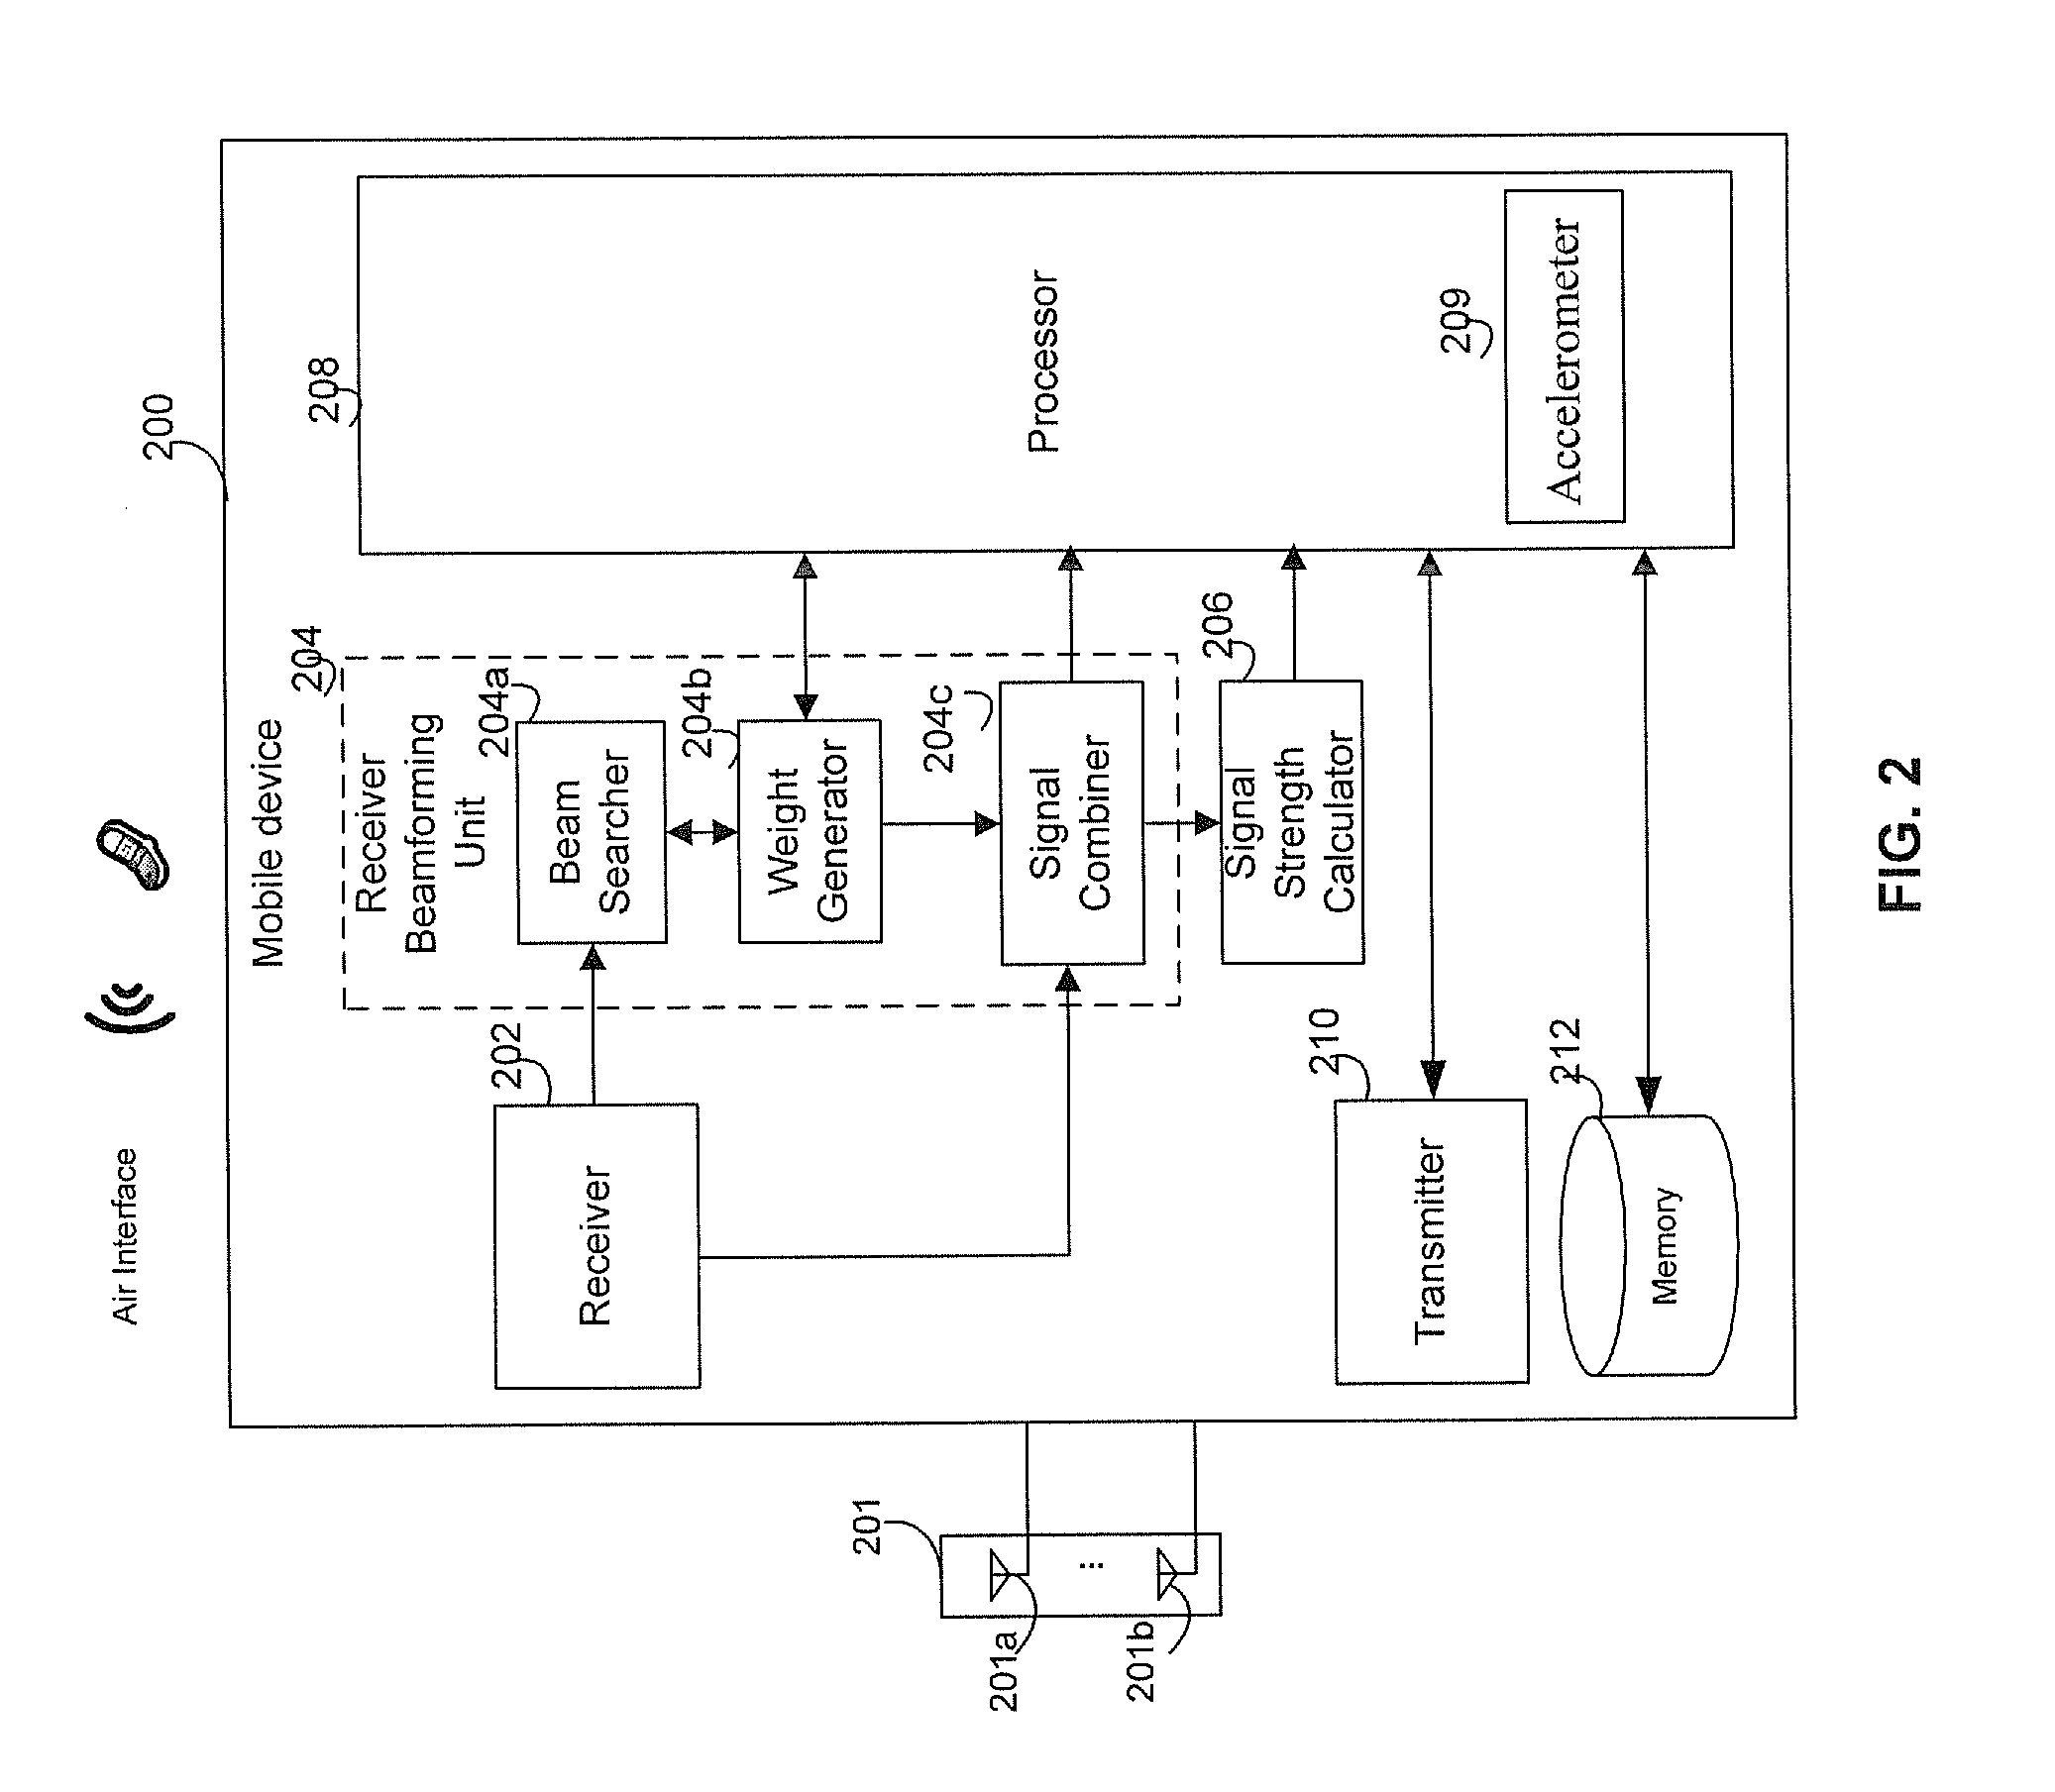 Method and system for refining a location of a base station and/or a mobile device based on signal strength measurements and corresponding transmitter and/or receiver antenna patterns